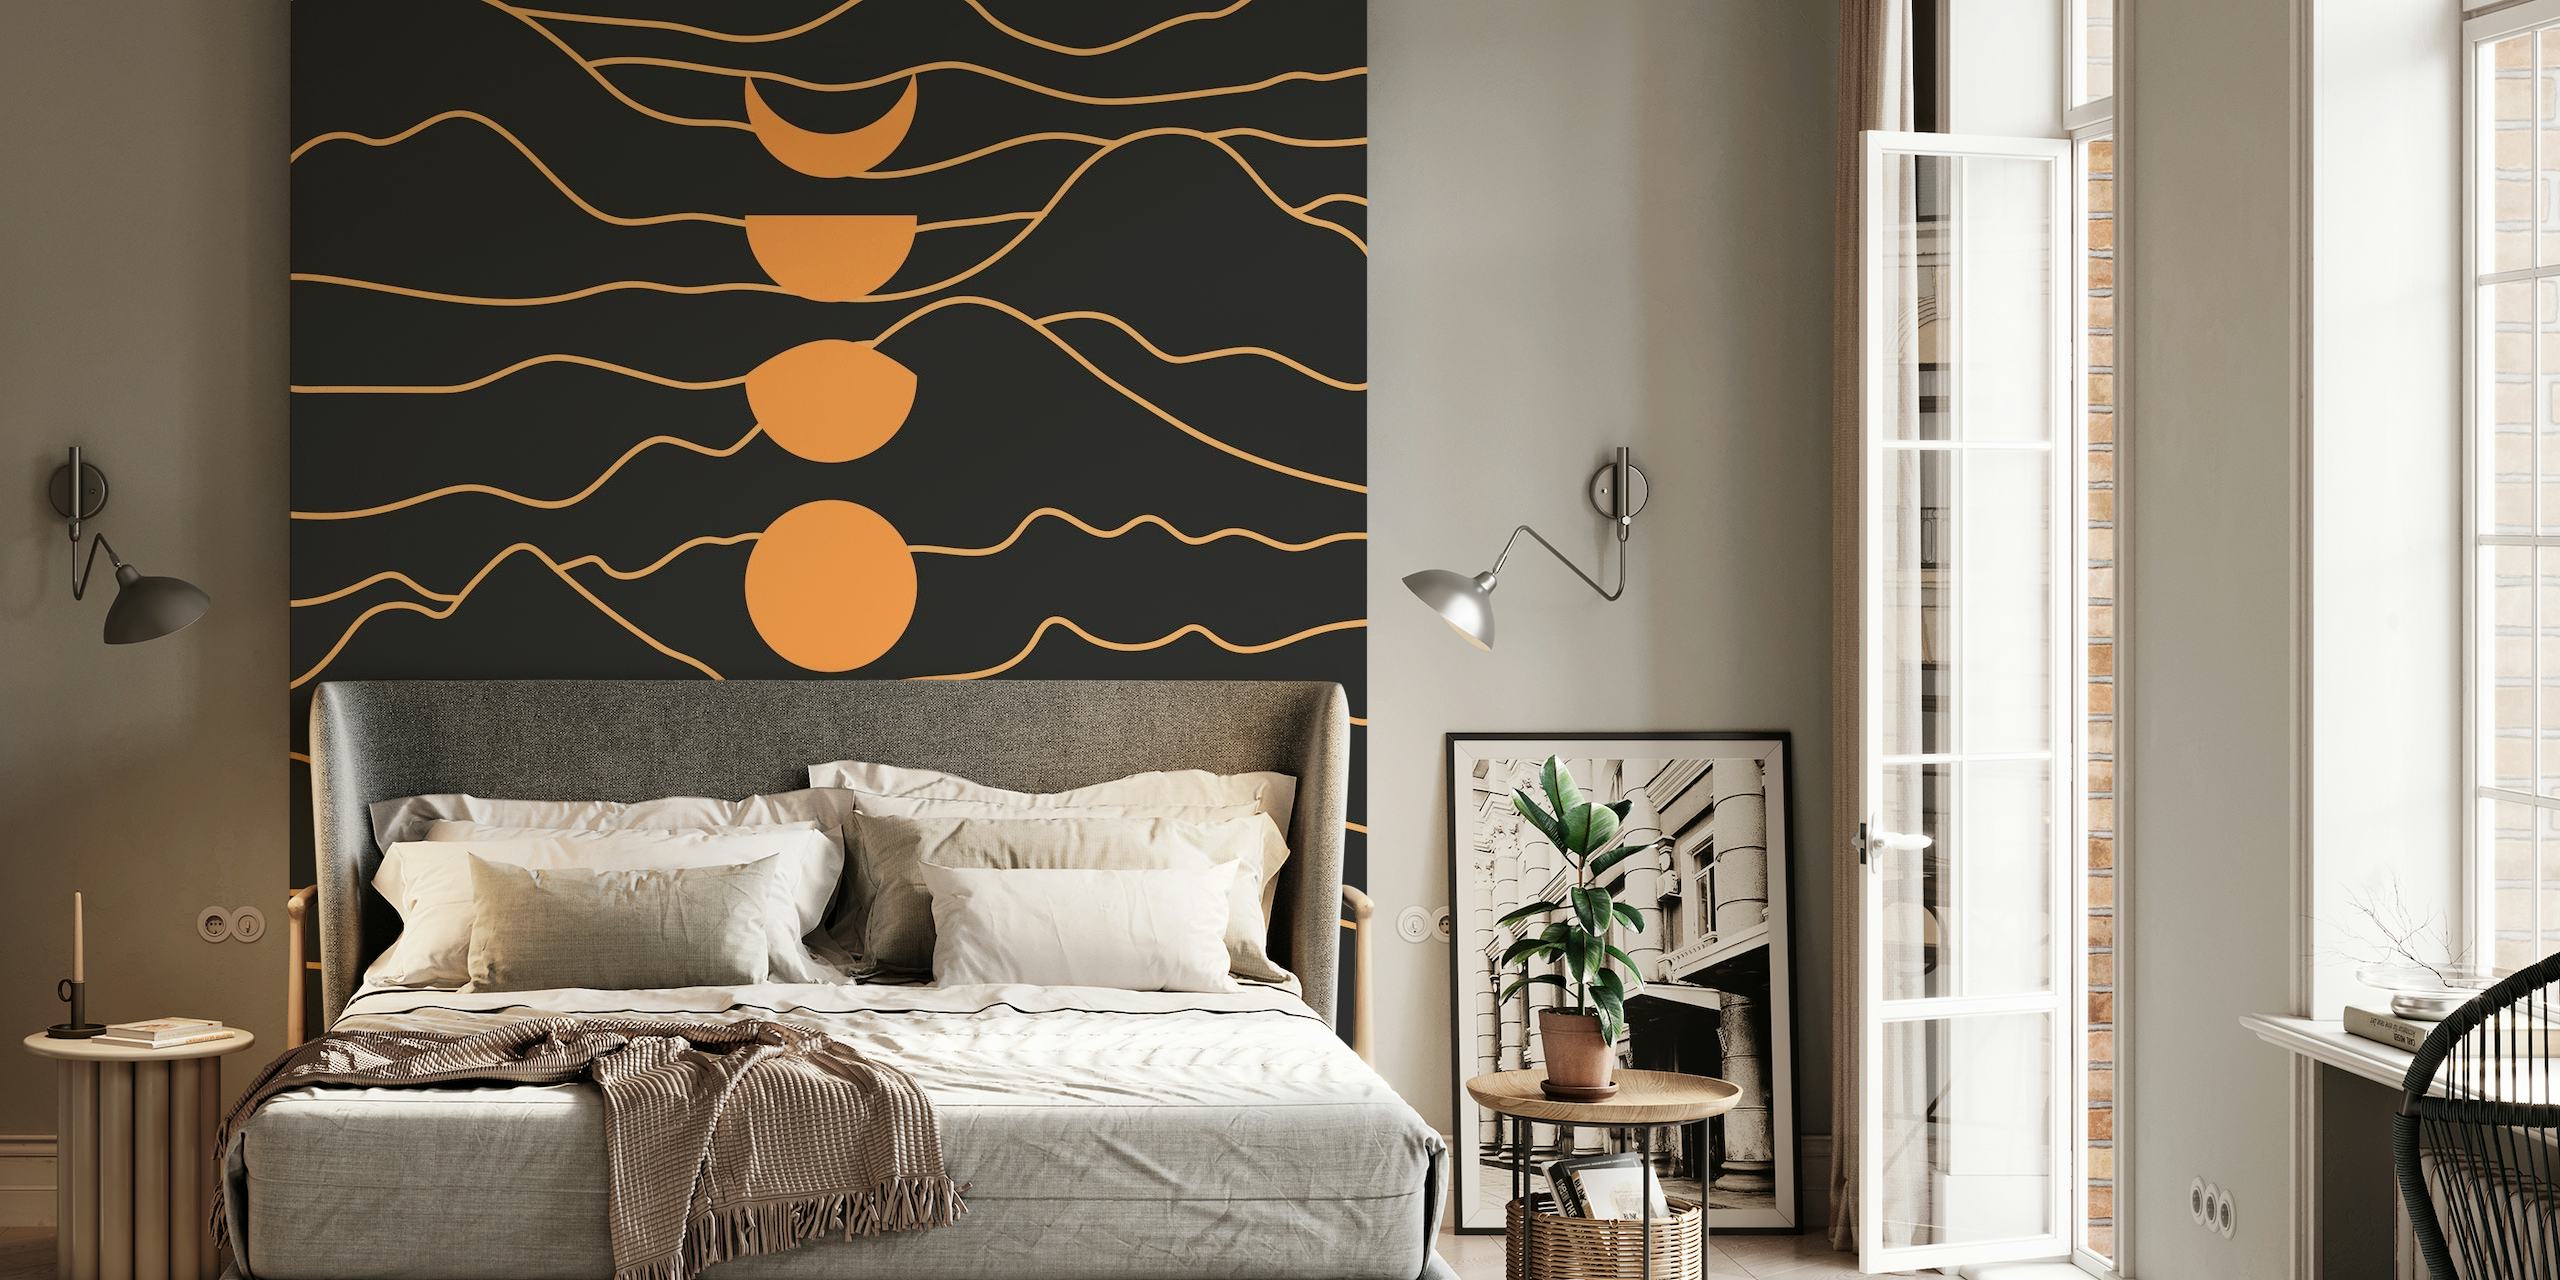 Moon Phases Mountains Black wall mural with lunar cycle over mountain silhouettes on a dark background